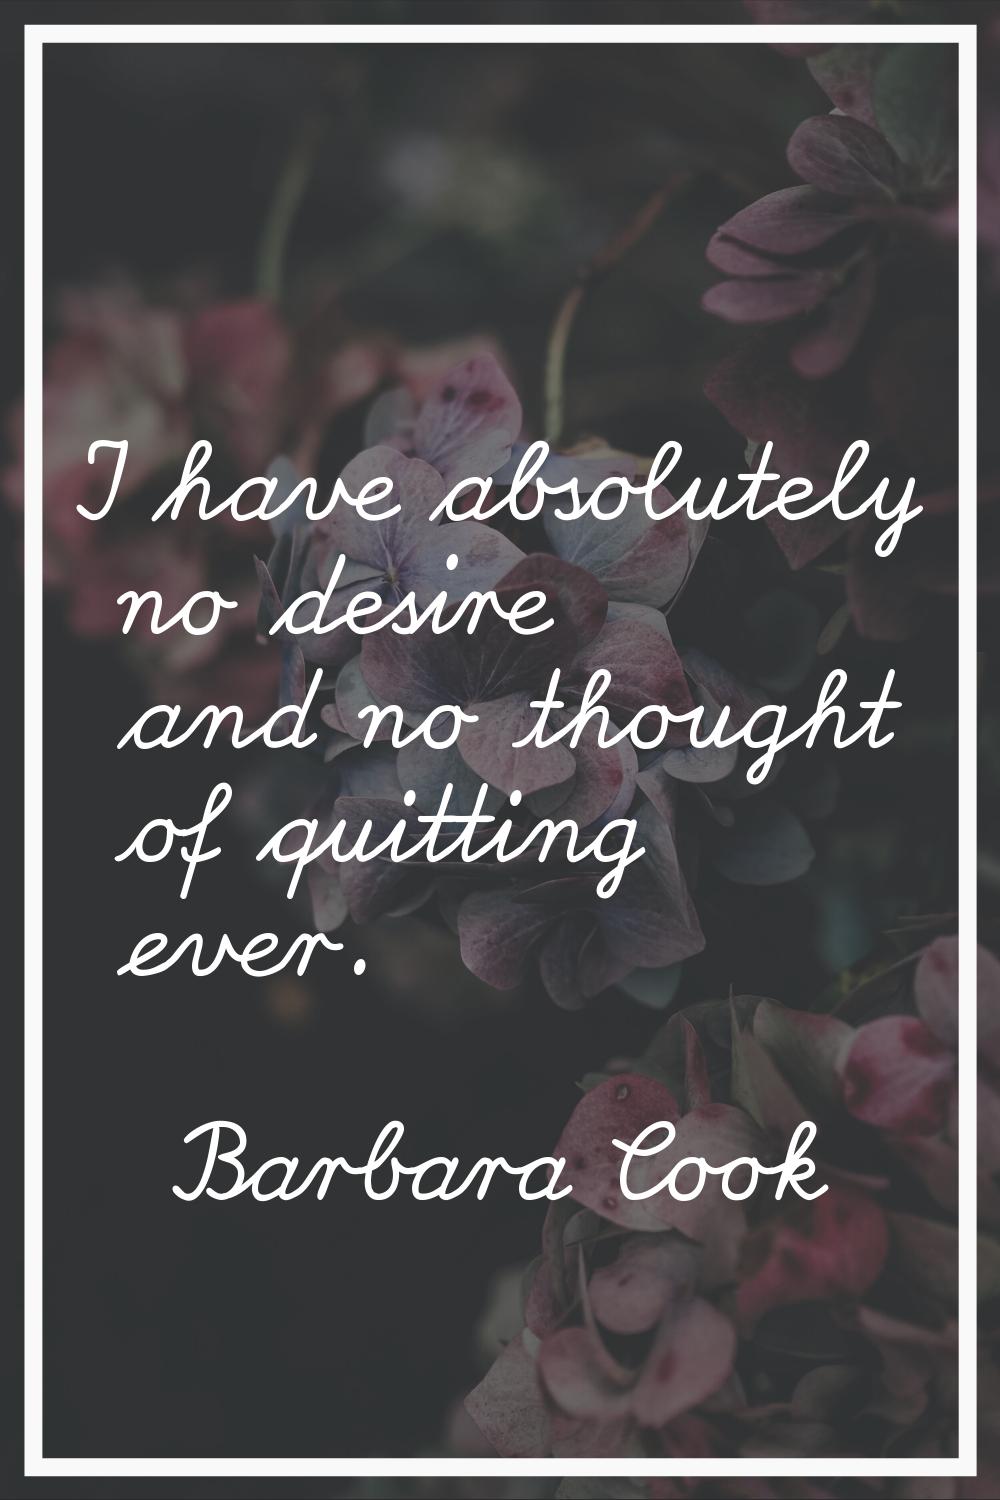 I have absolutely no desire and no thought of quitting ever.